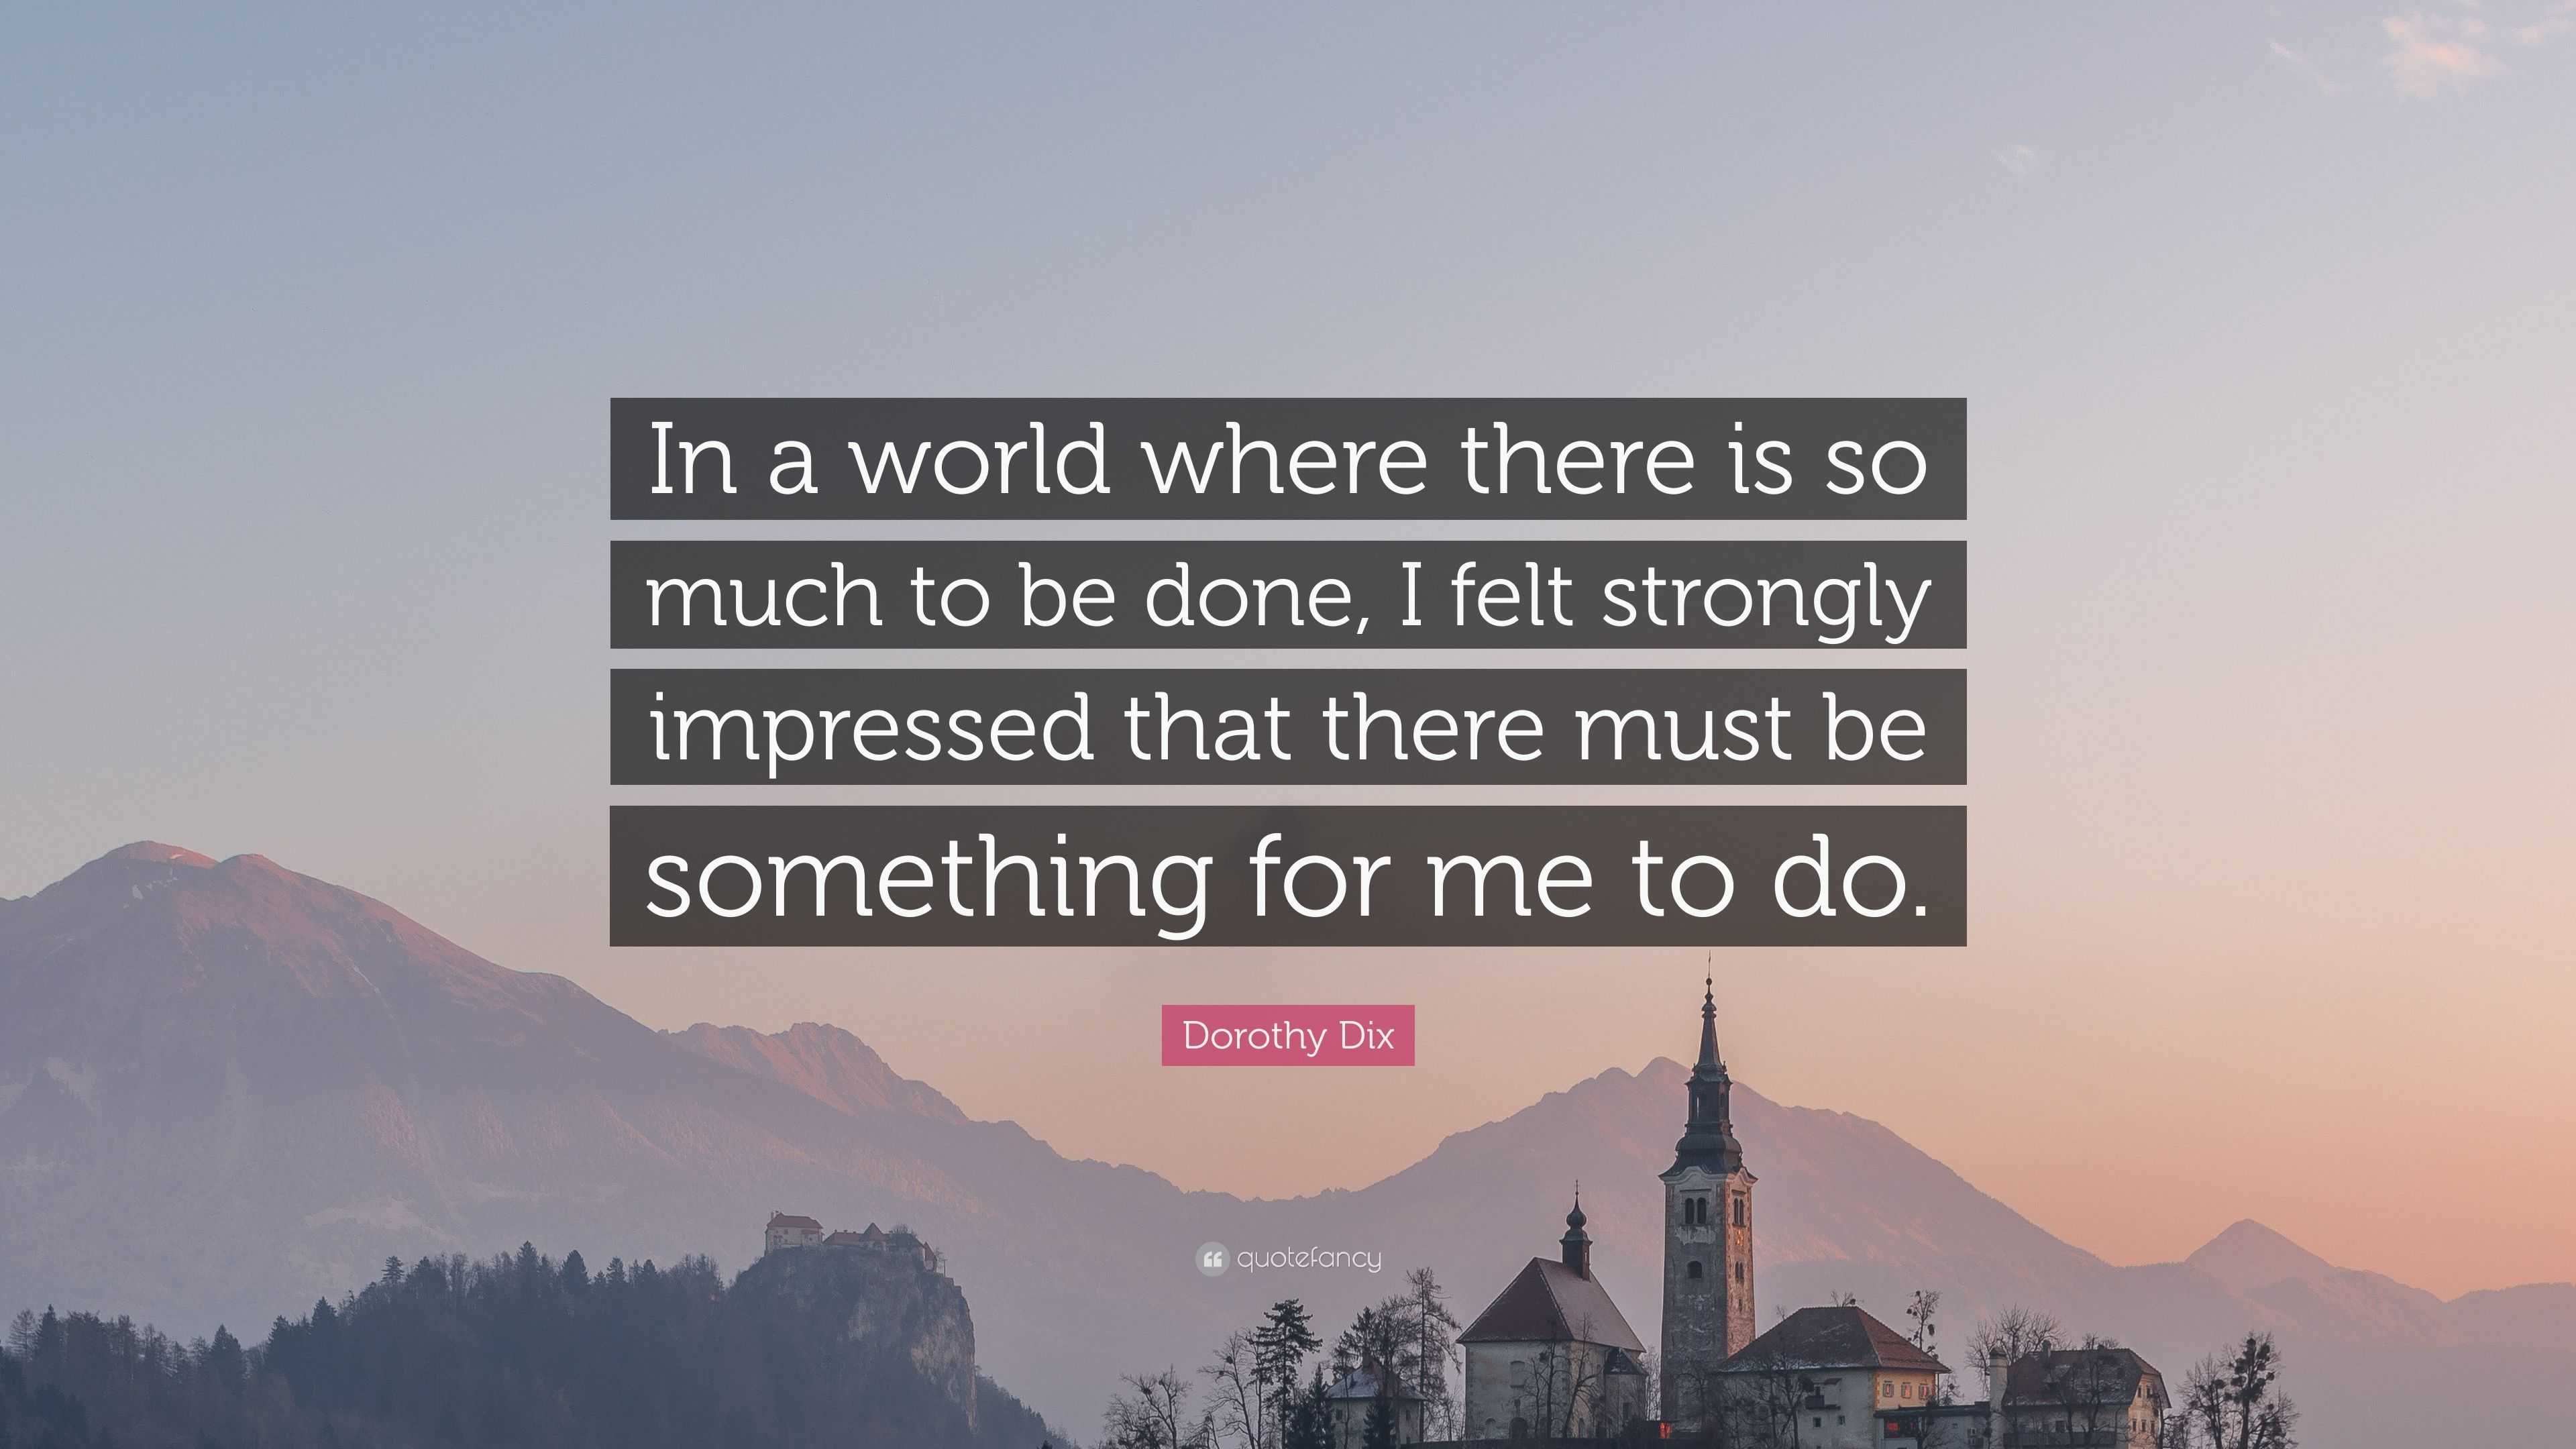 Dorothy Dix Quote: “In a world where there is so much to be done, I